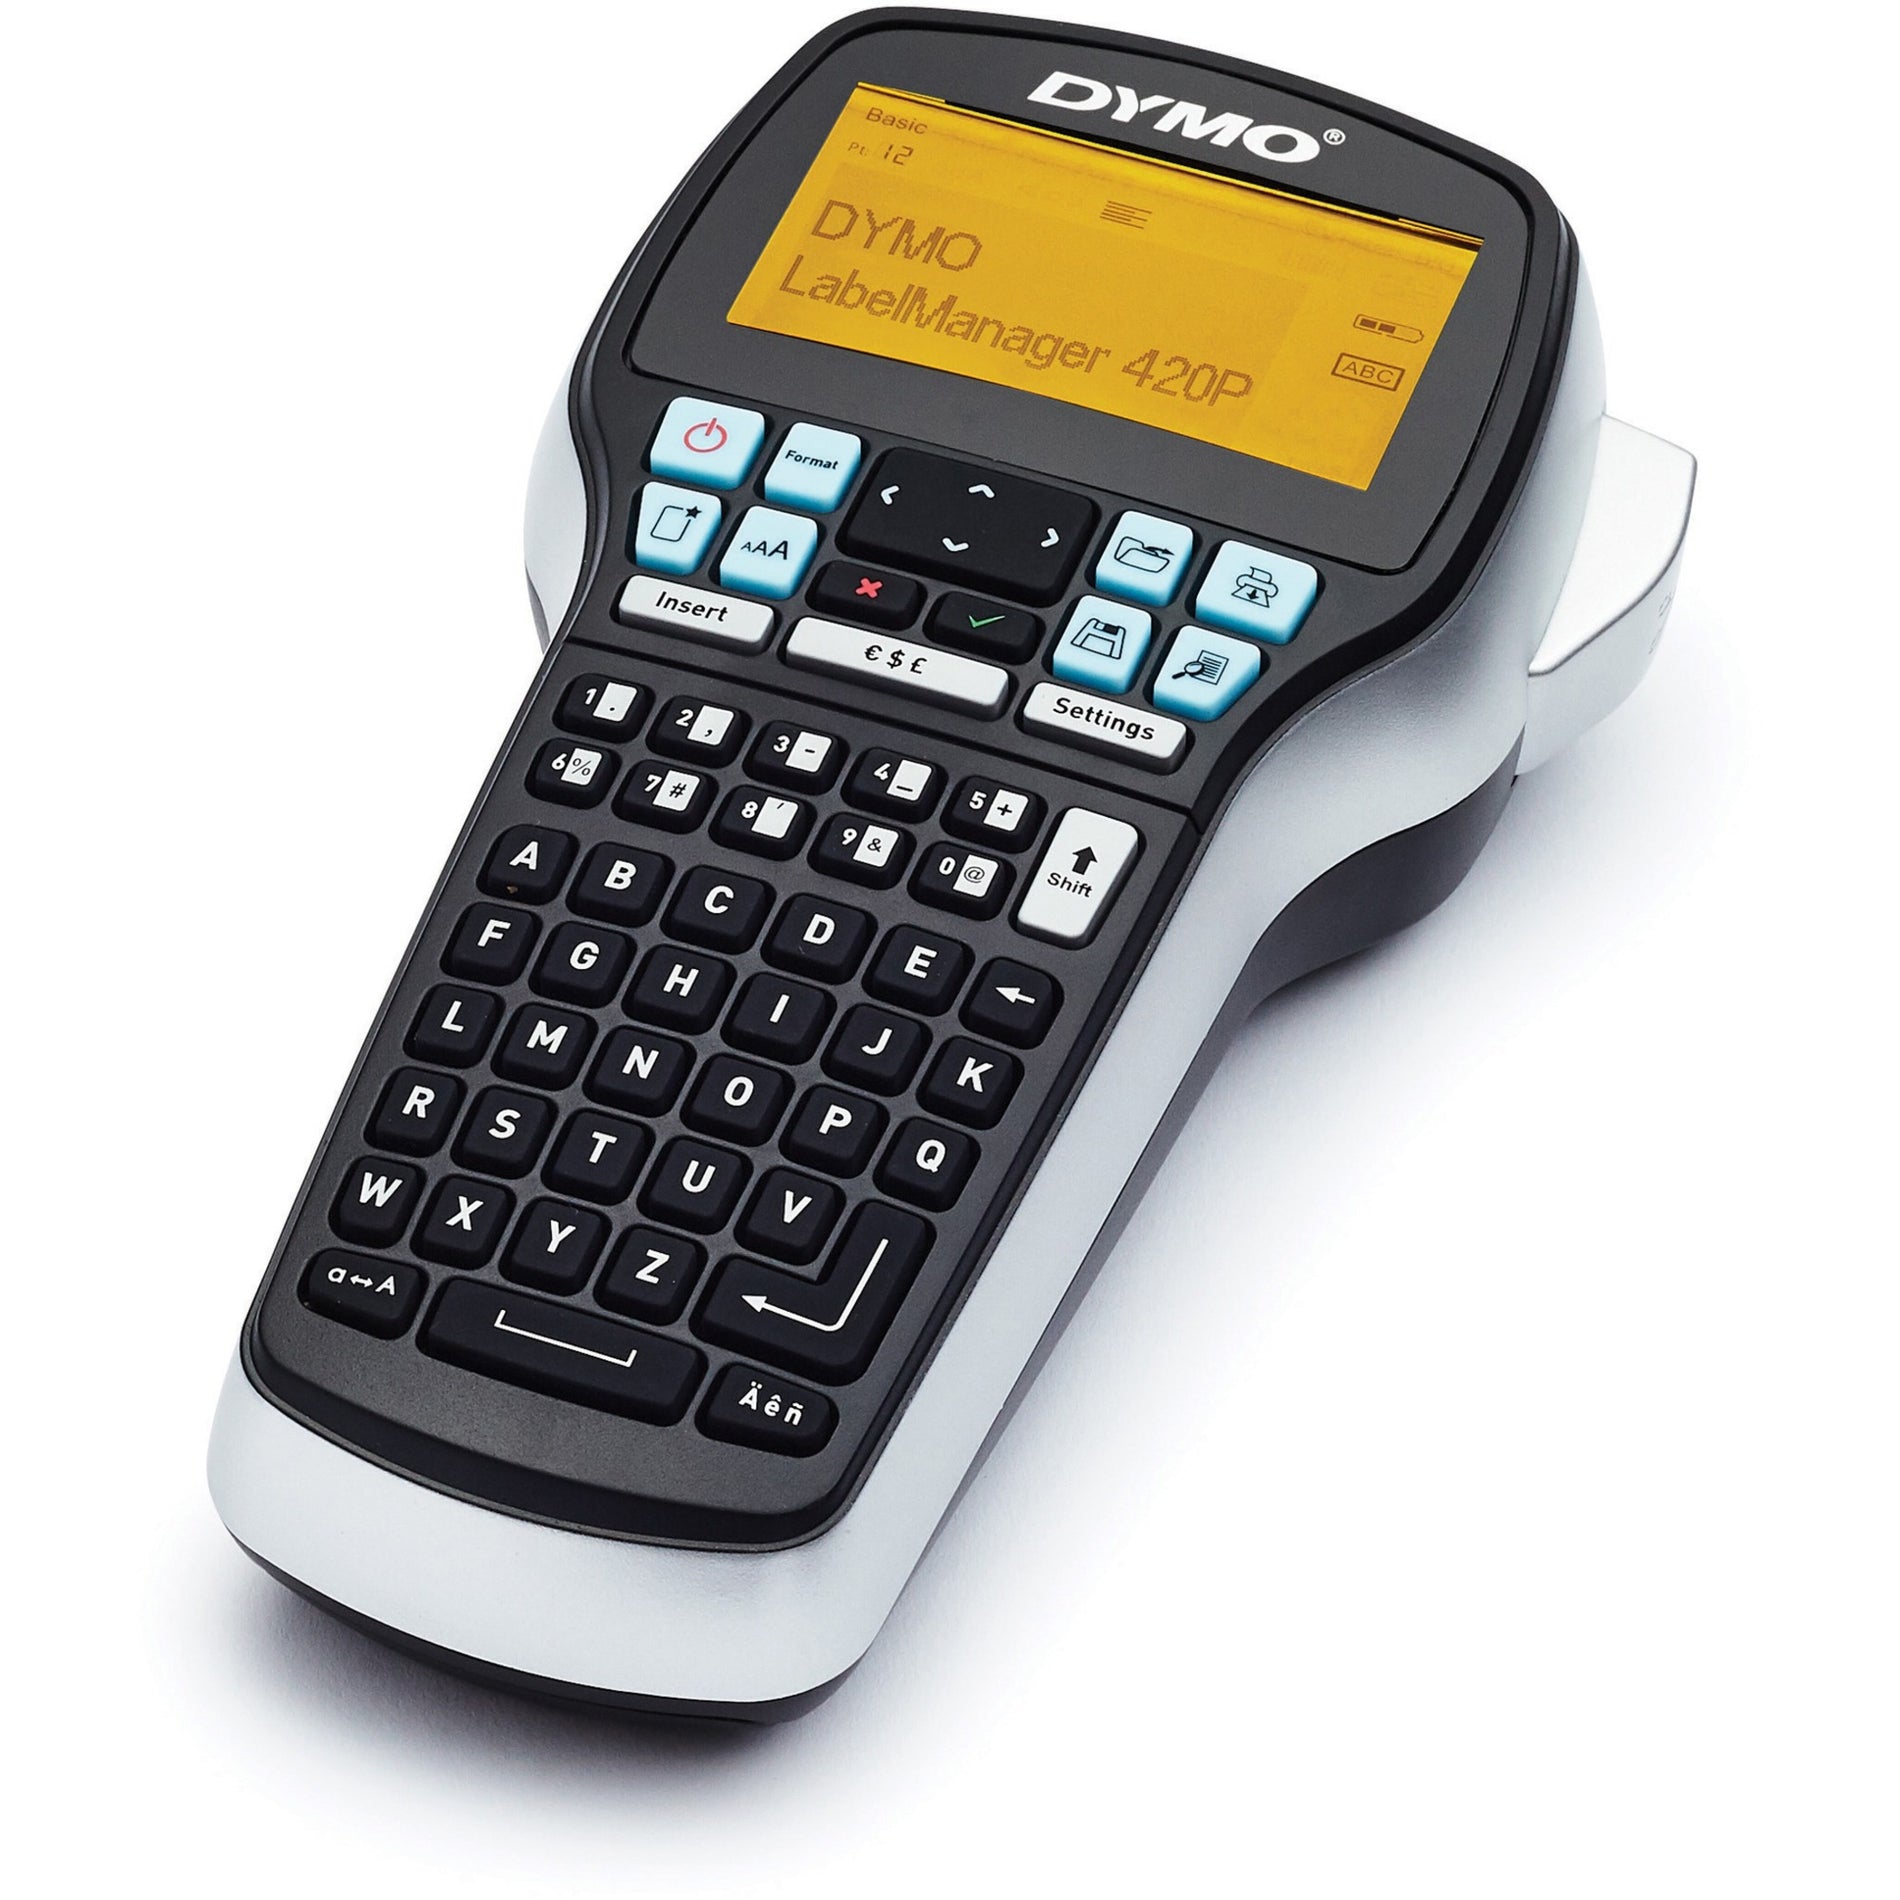 Dymo 1768815 LabelManager 420P Portable Labelmaker, LCD Display, USB Connectivity